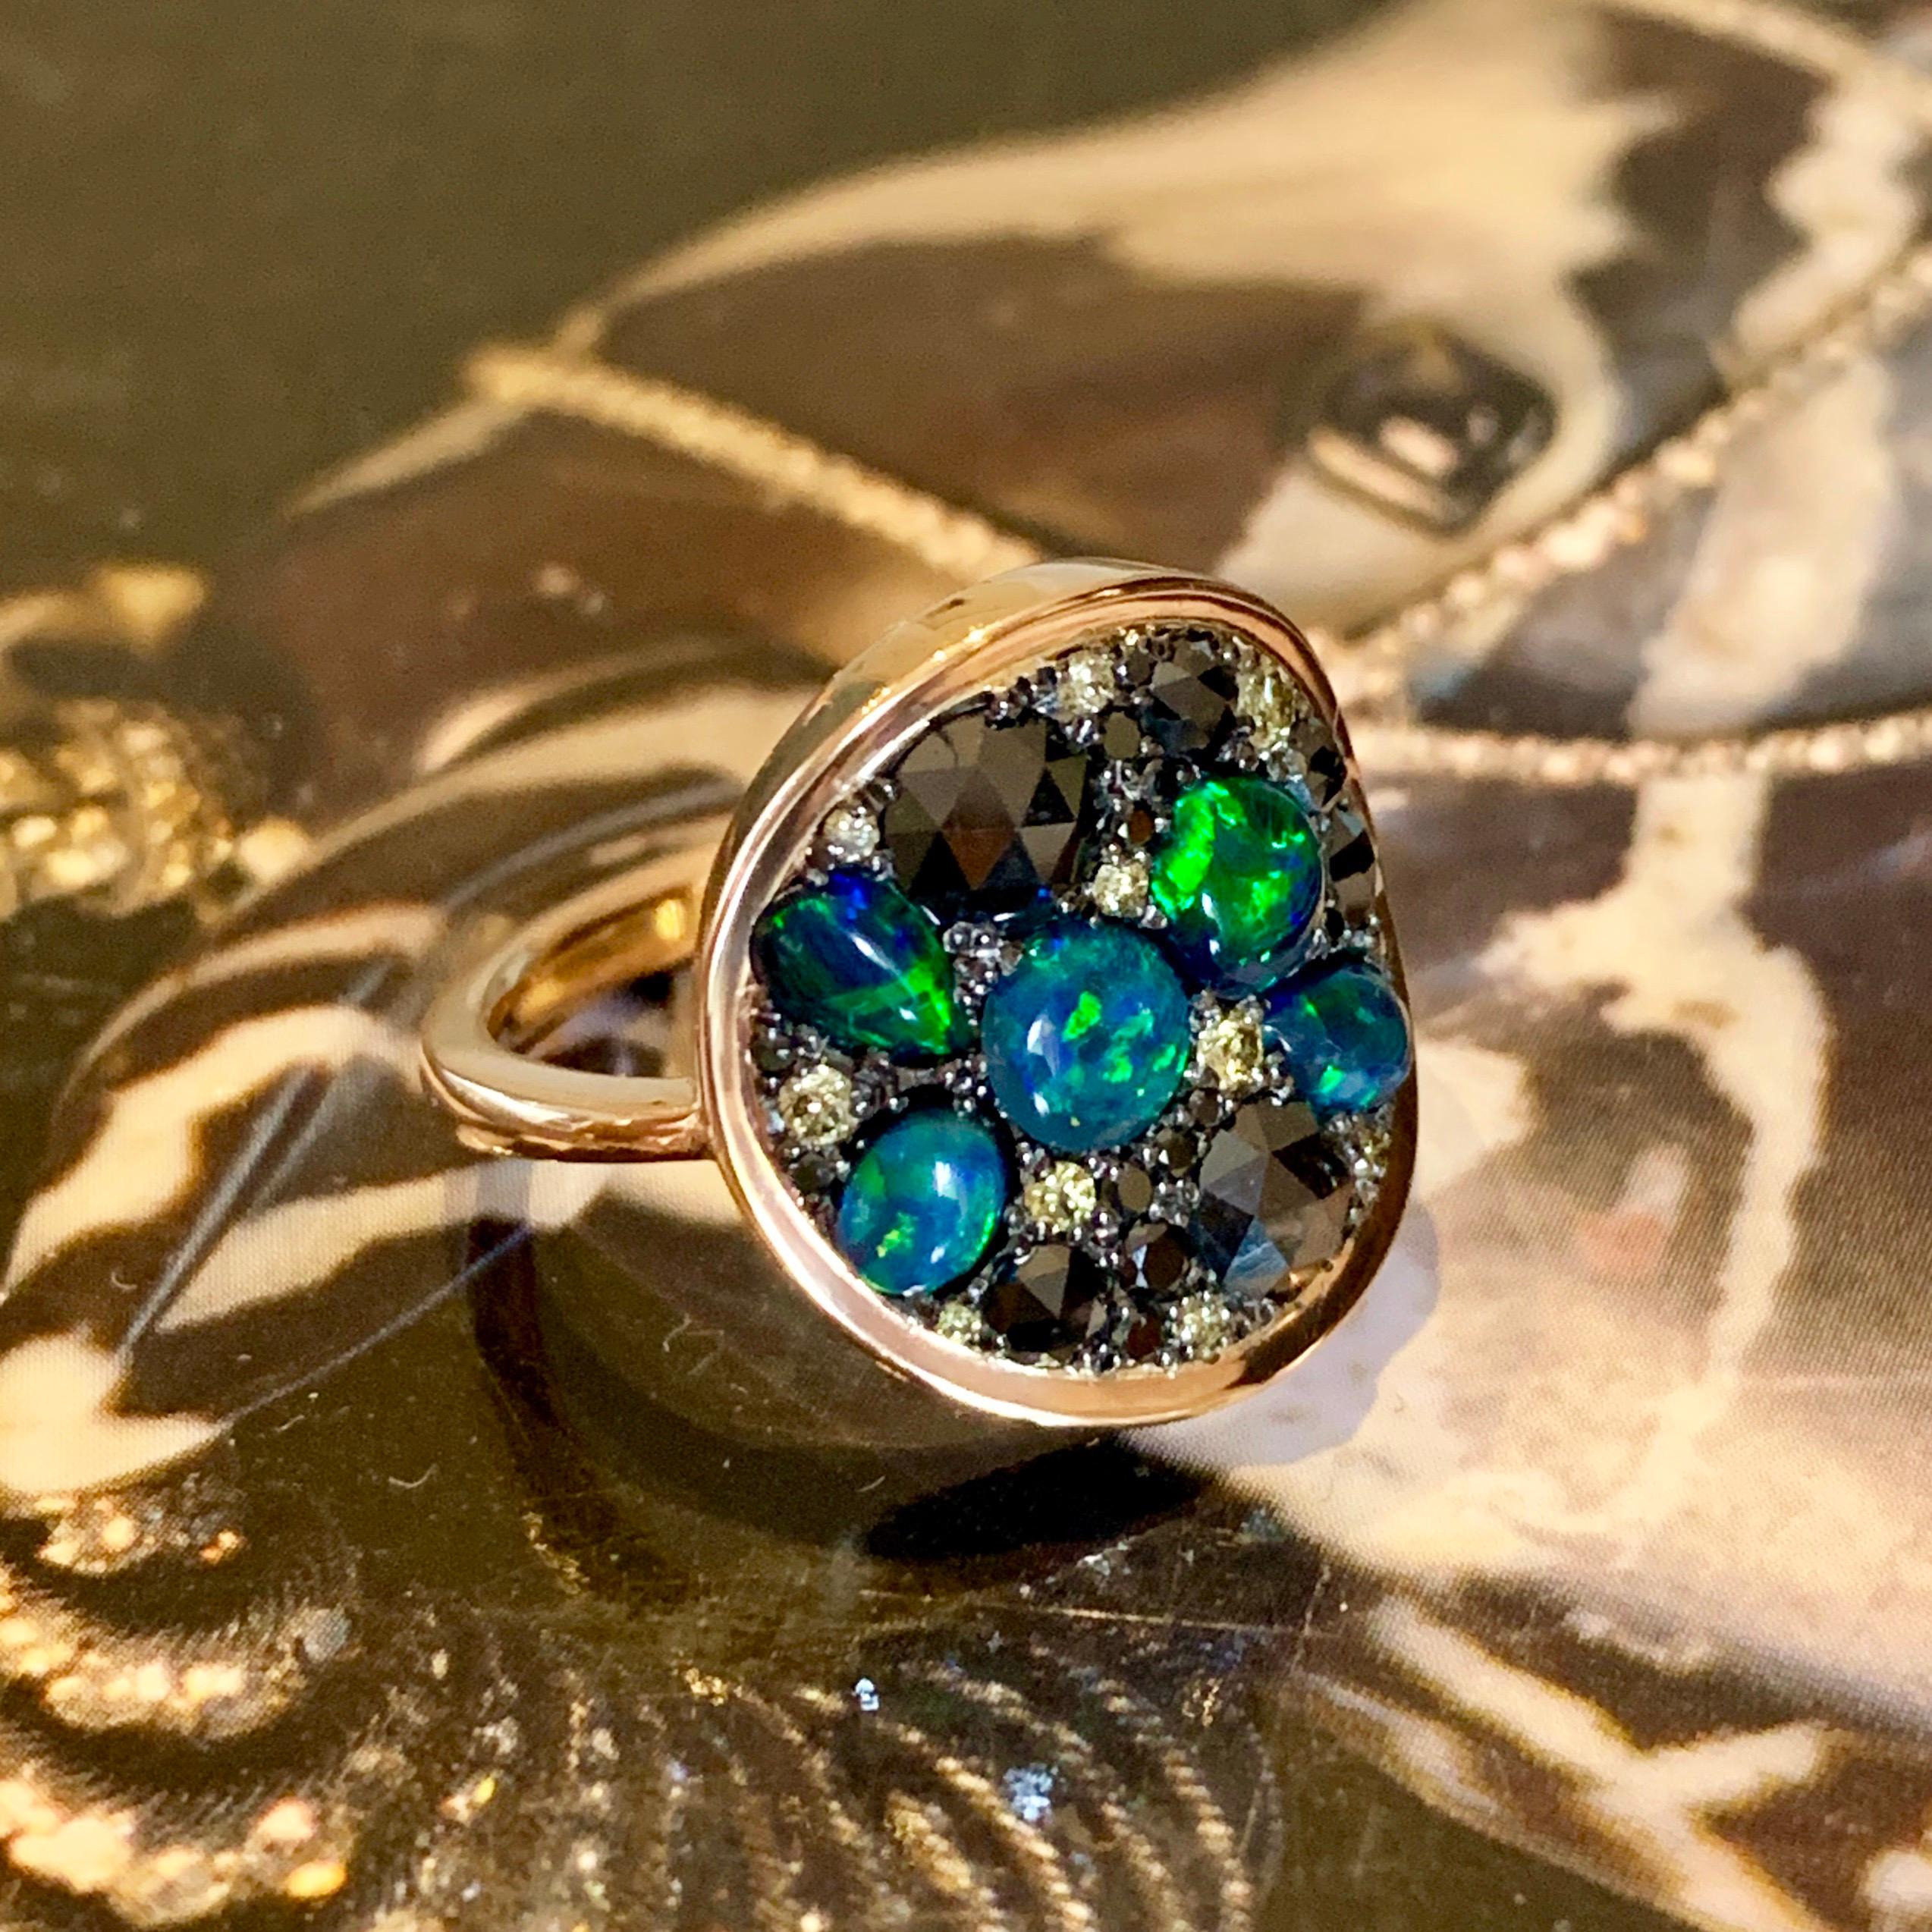 One of a kind ring in 18K Rose gold 5,2 g & blackened sterling silver (The stones are set on silver to create a black background for the stones)
Pave set with Black rose- and brilliant-cut diamonds, fancy olive green diamonds. Total carat diamonds: 